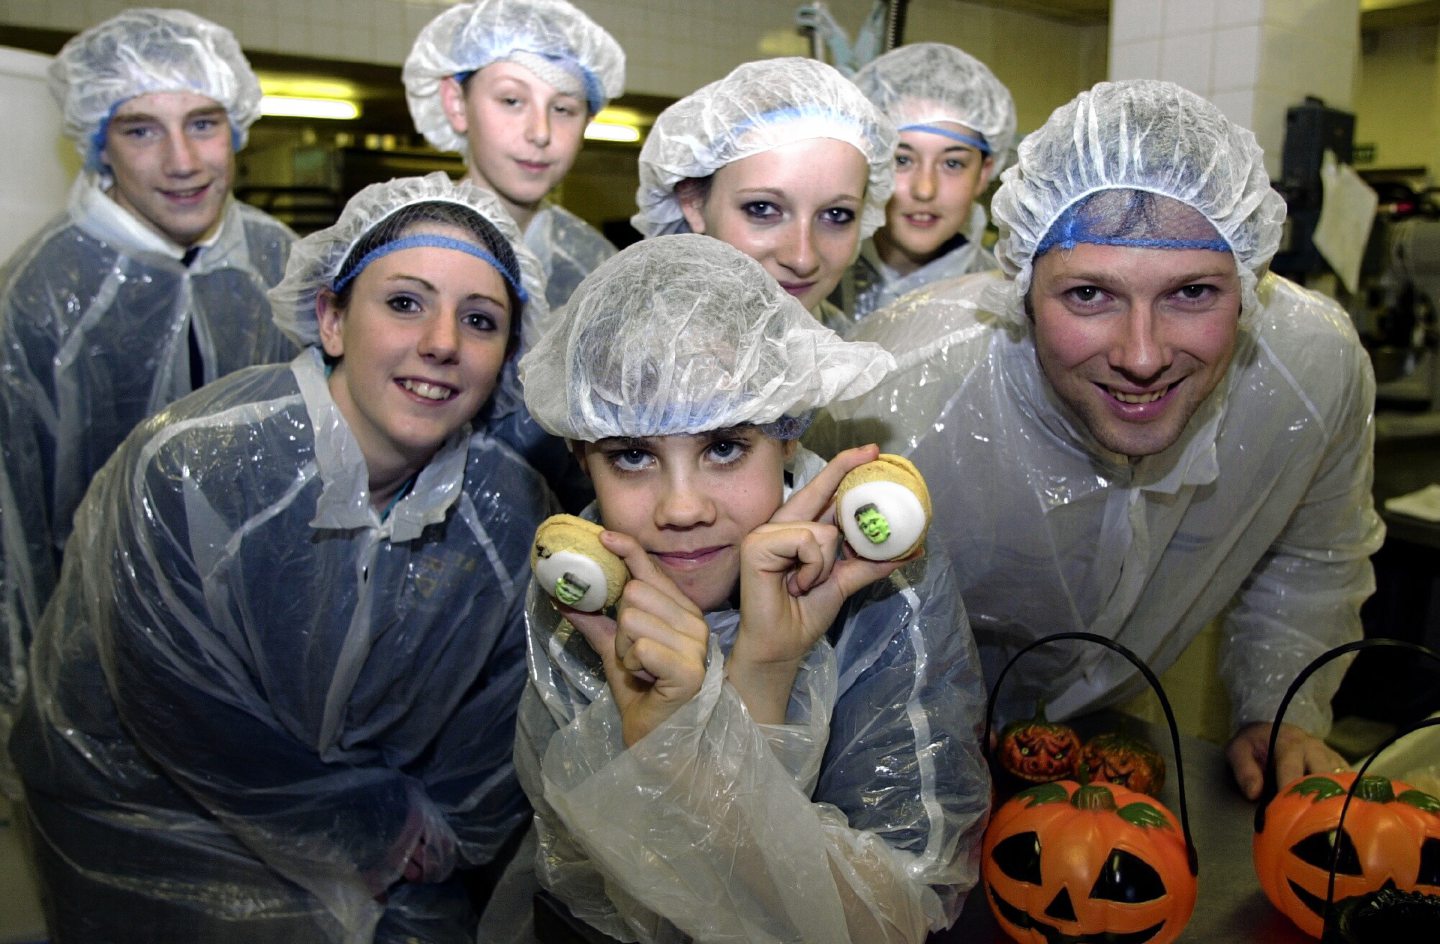 Inverurie Academy wearing plastic clothing covers and hair nets. One pupil at the front is holding Halloween-themed biscuits